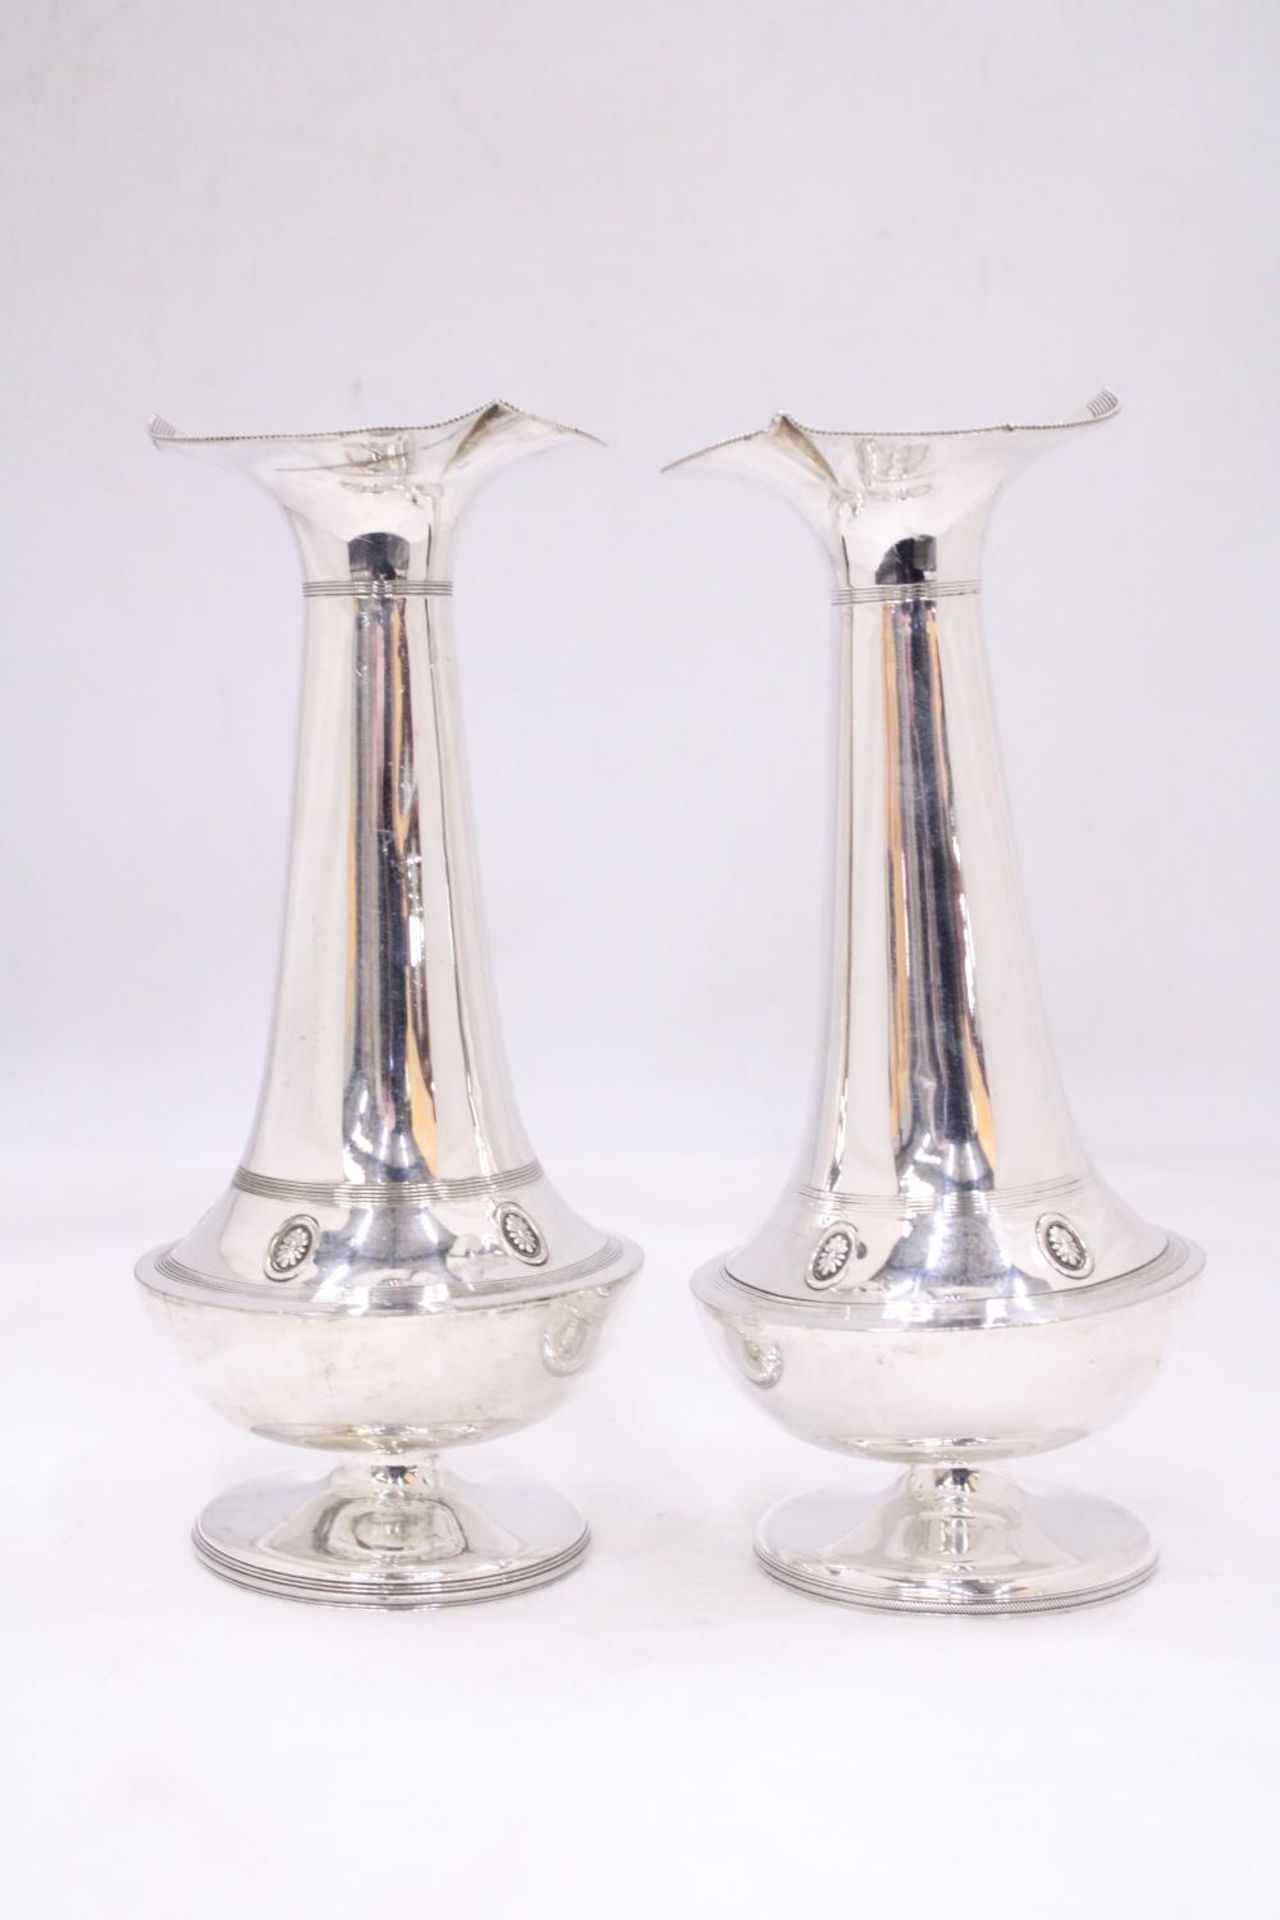 A PAIR OF VINTAGE SILVER PLATED "BUD" VASES - Image 2 of 4